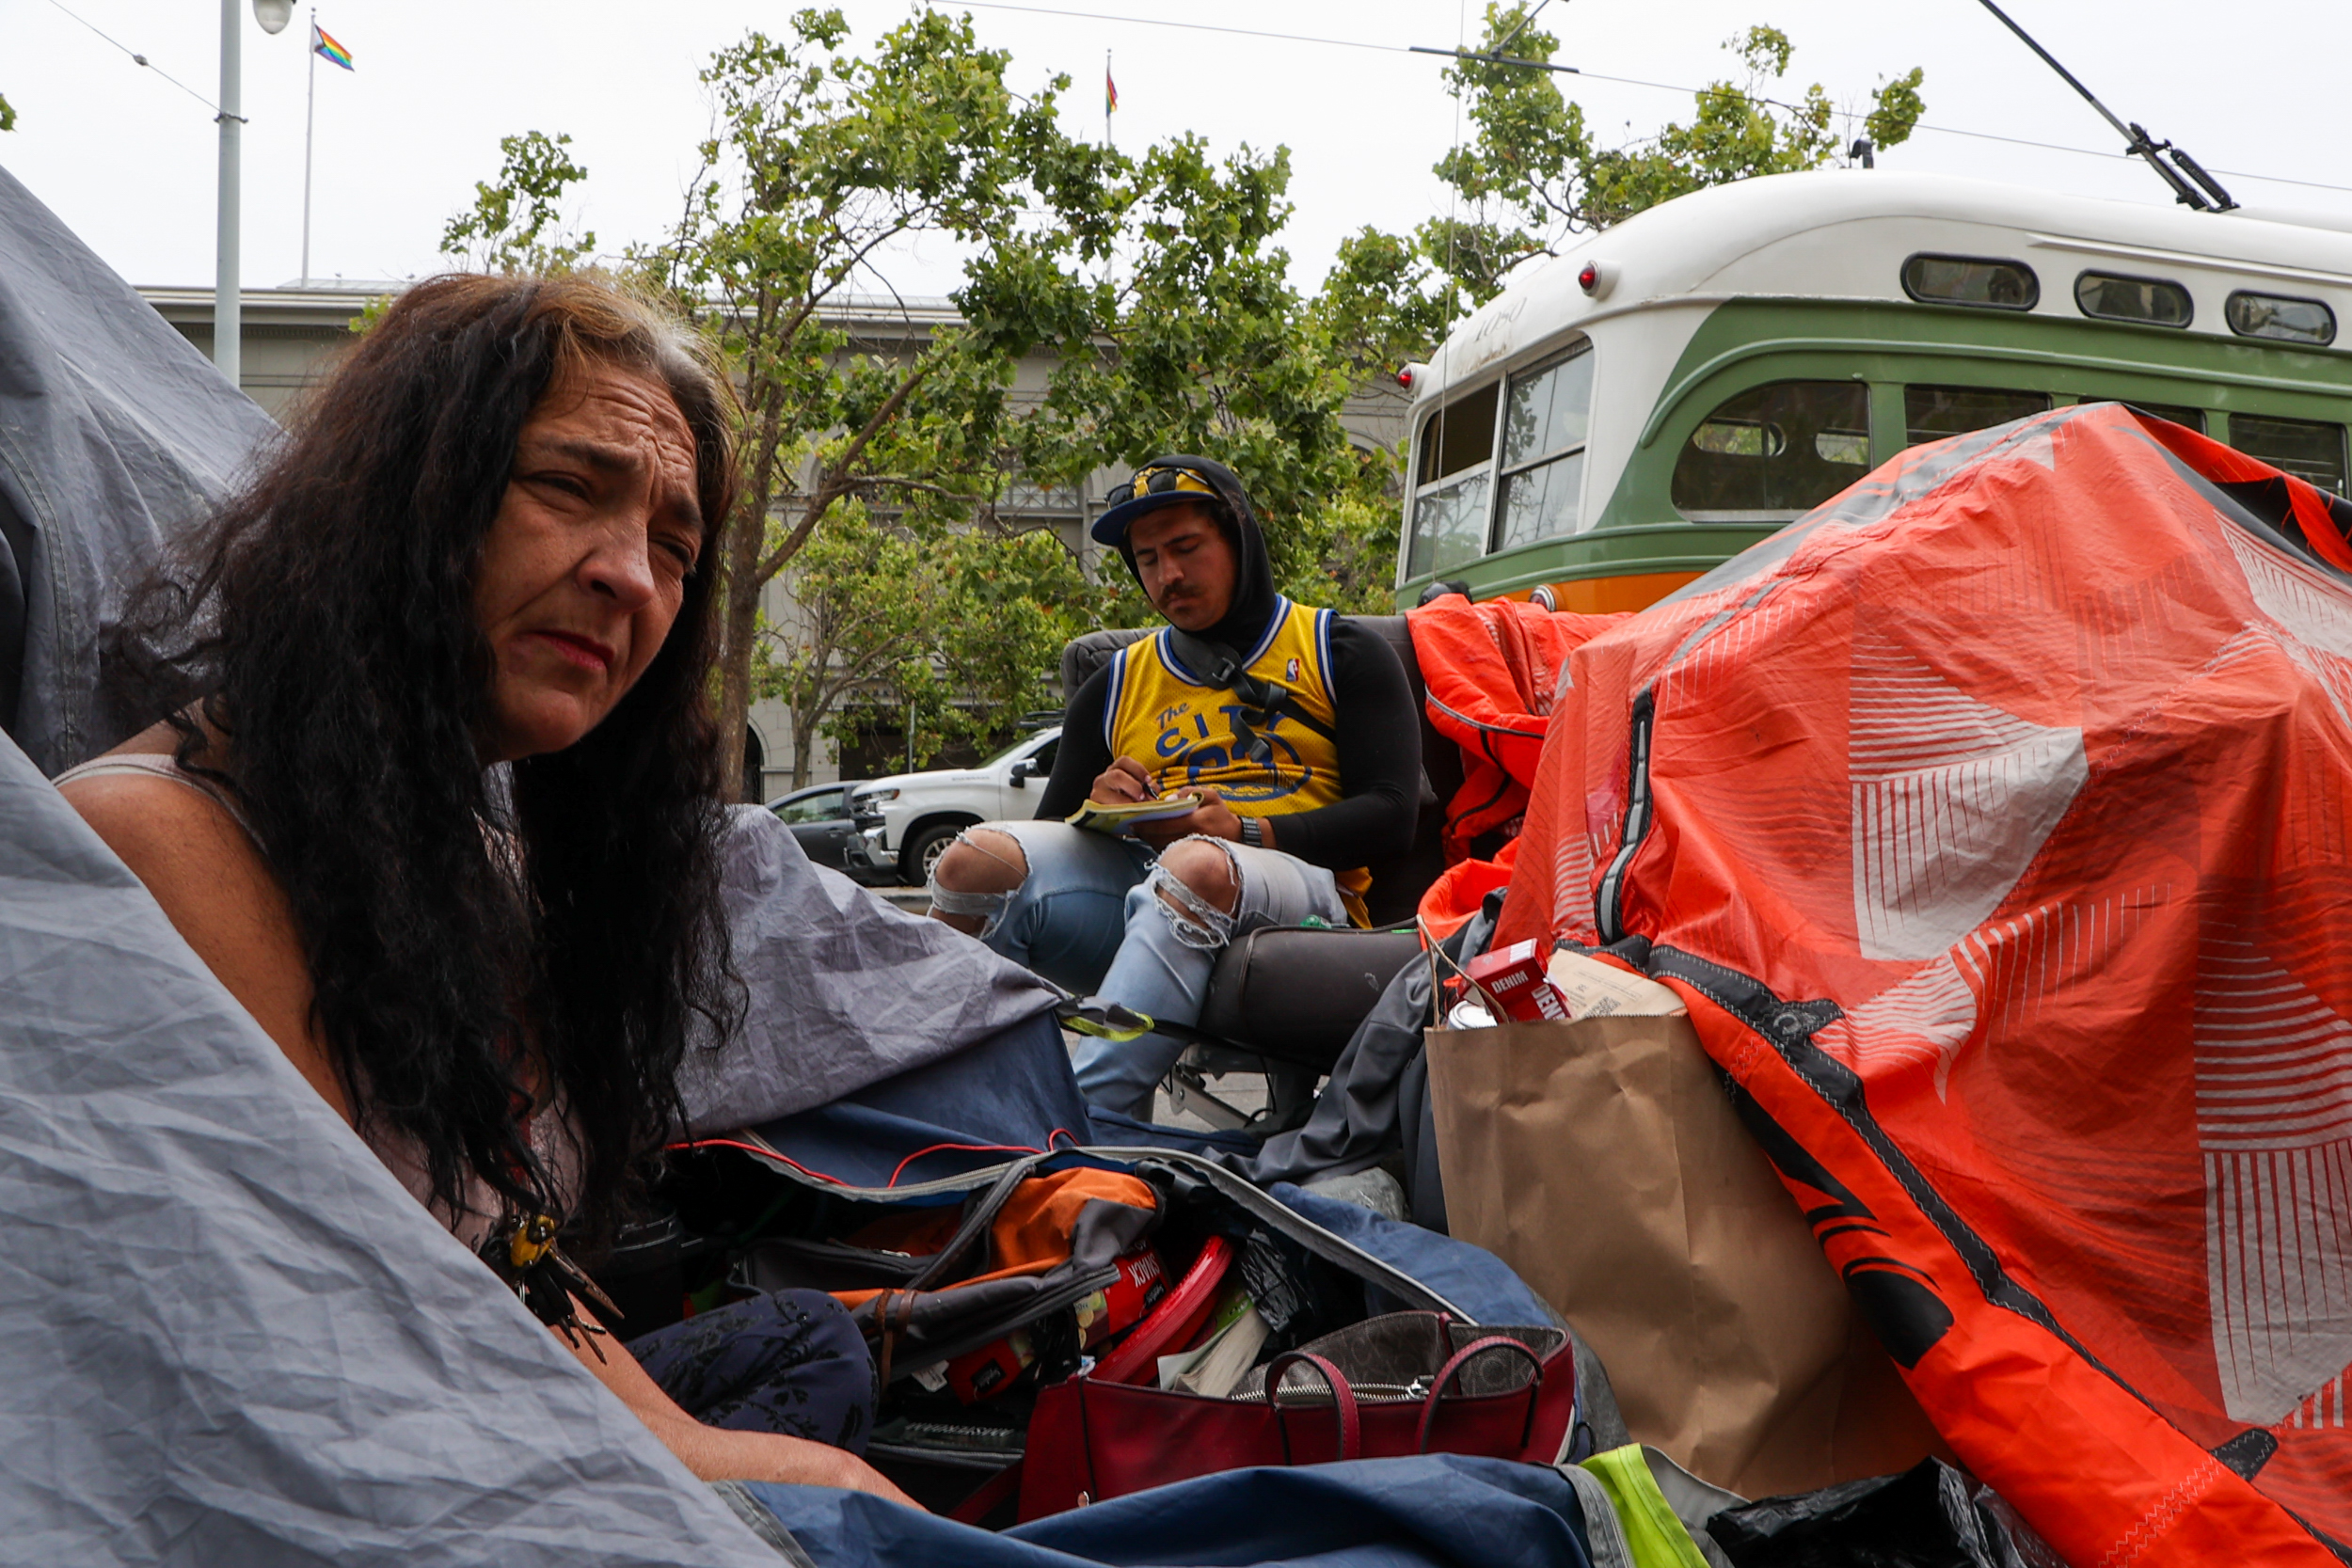 Two people at a homeless encampment in San Francisco